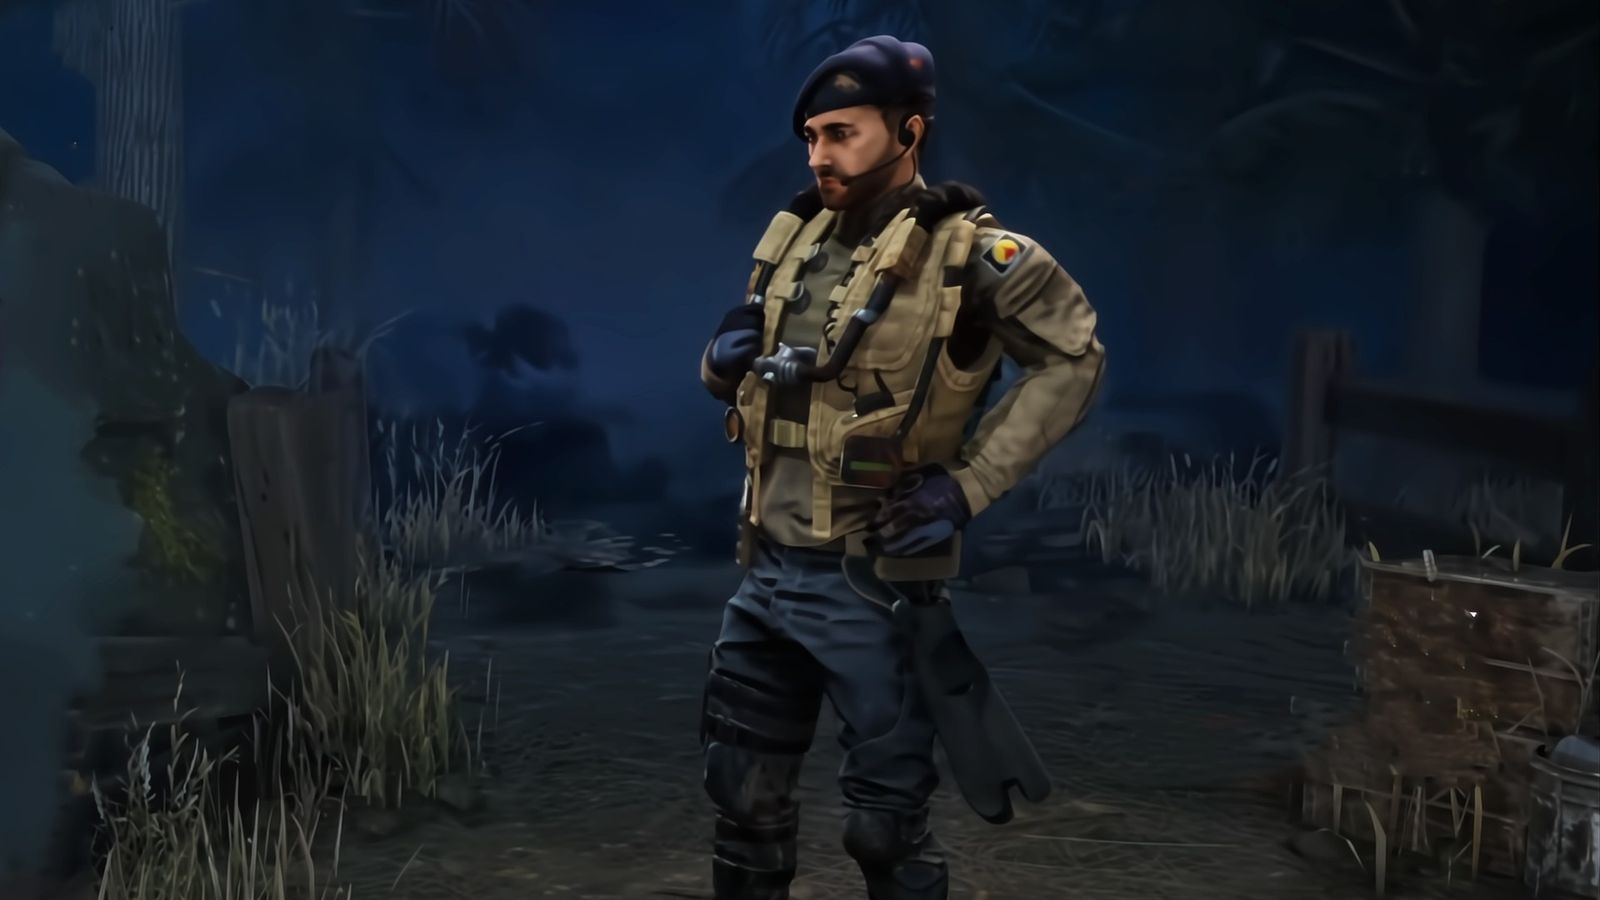 Dead By Daylight - skin of the operator Tubarao from Rainbow Six Siege, stood in a dark forest.